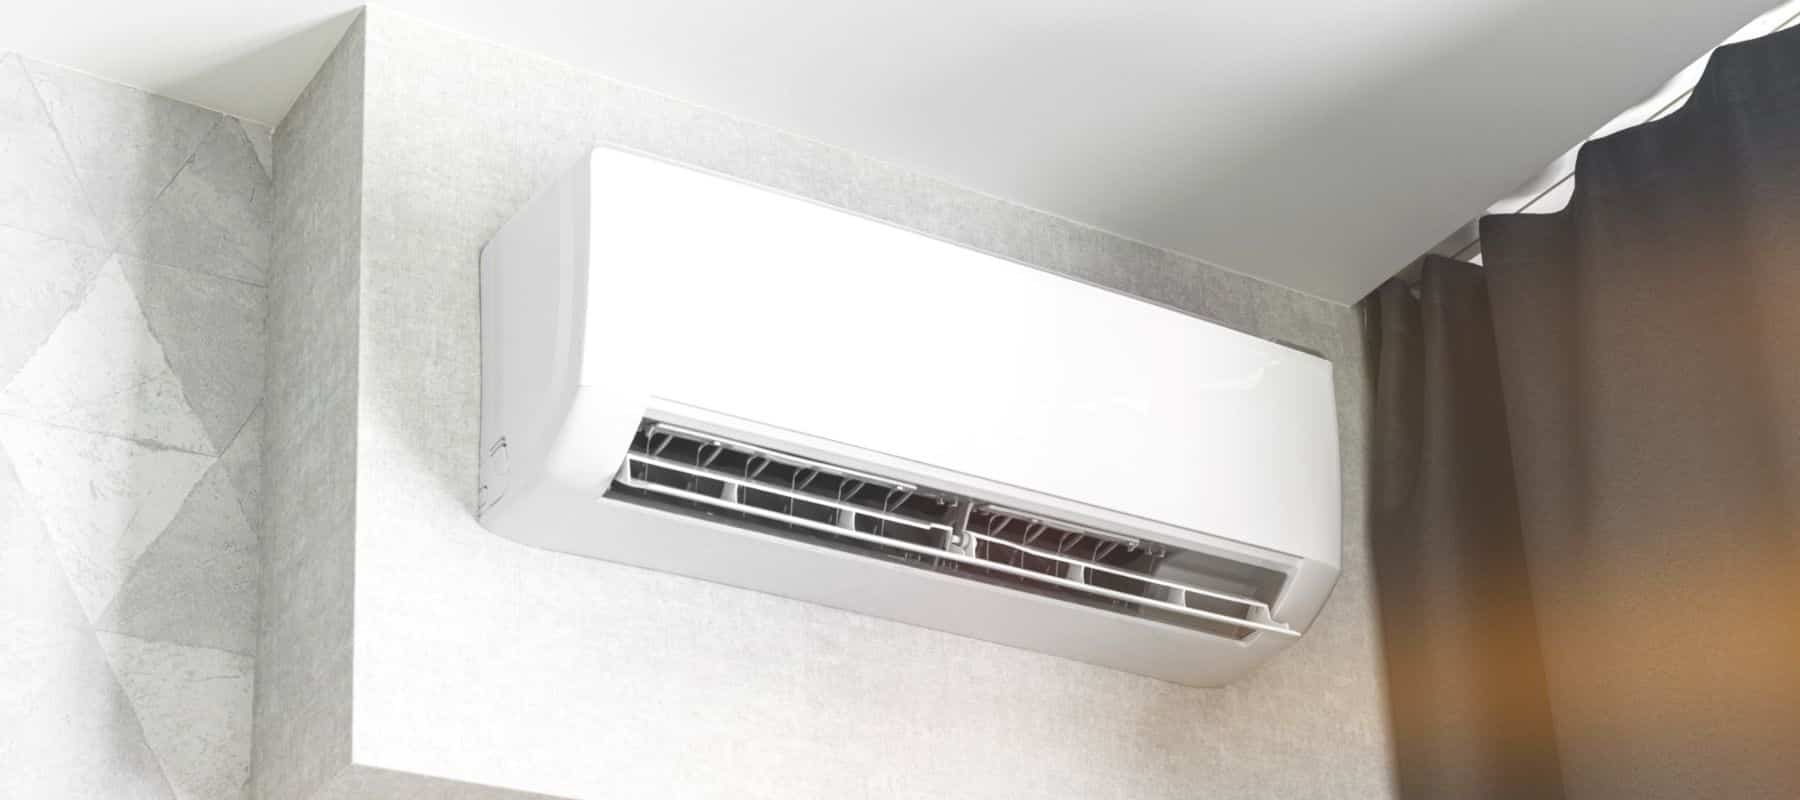 ductless ac unit positioned on the wall in a residential home